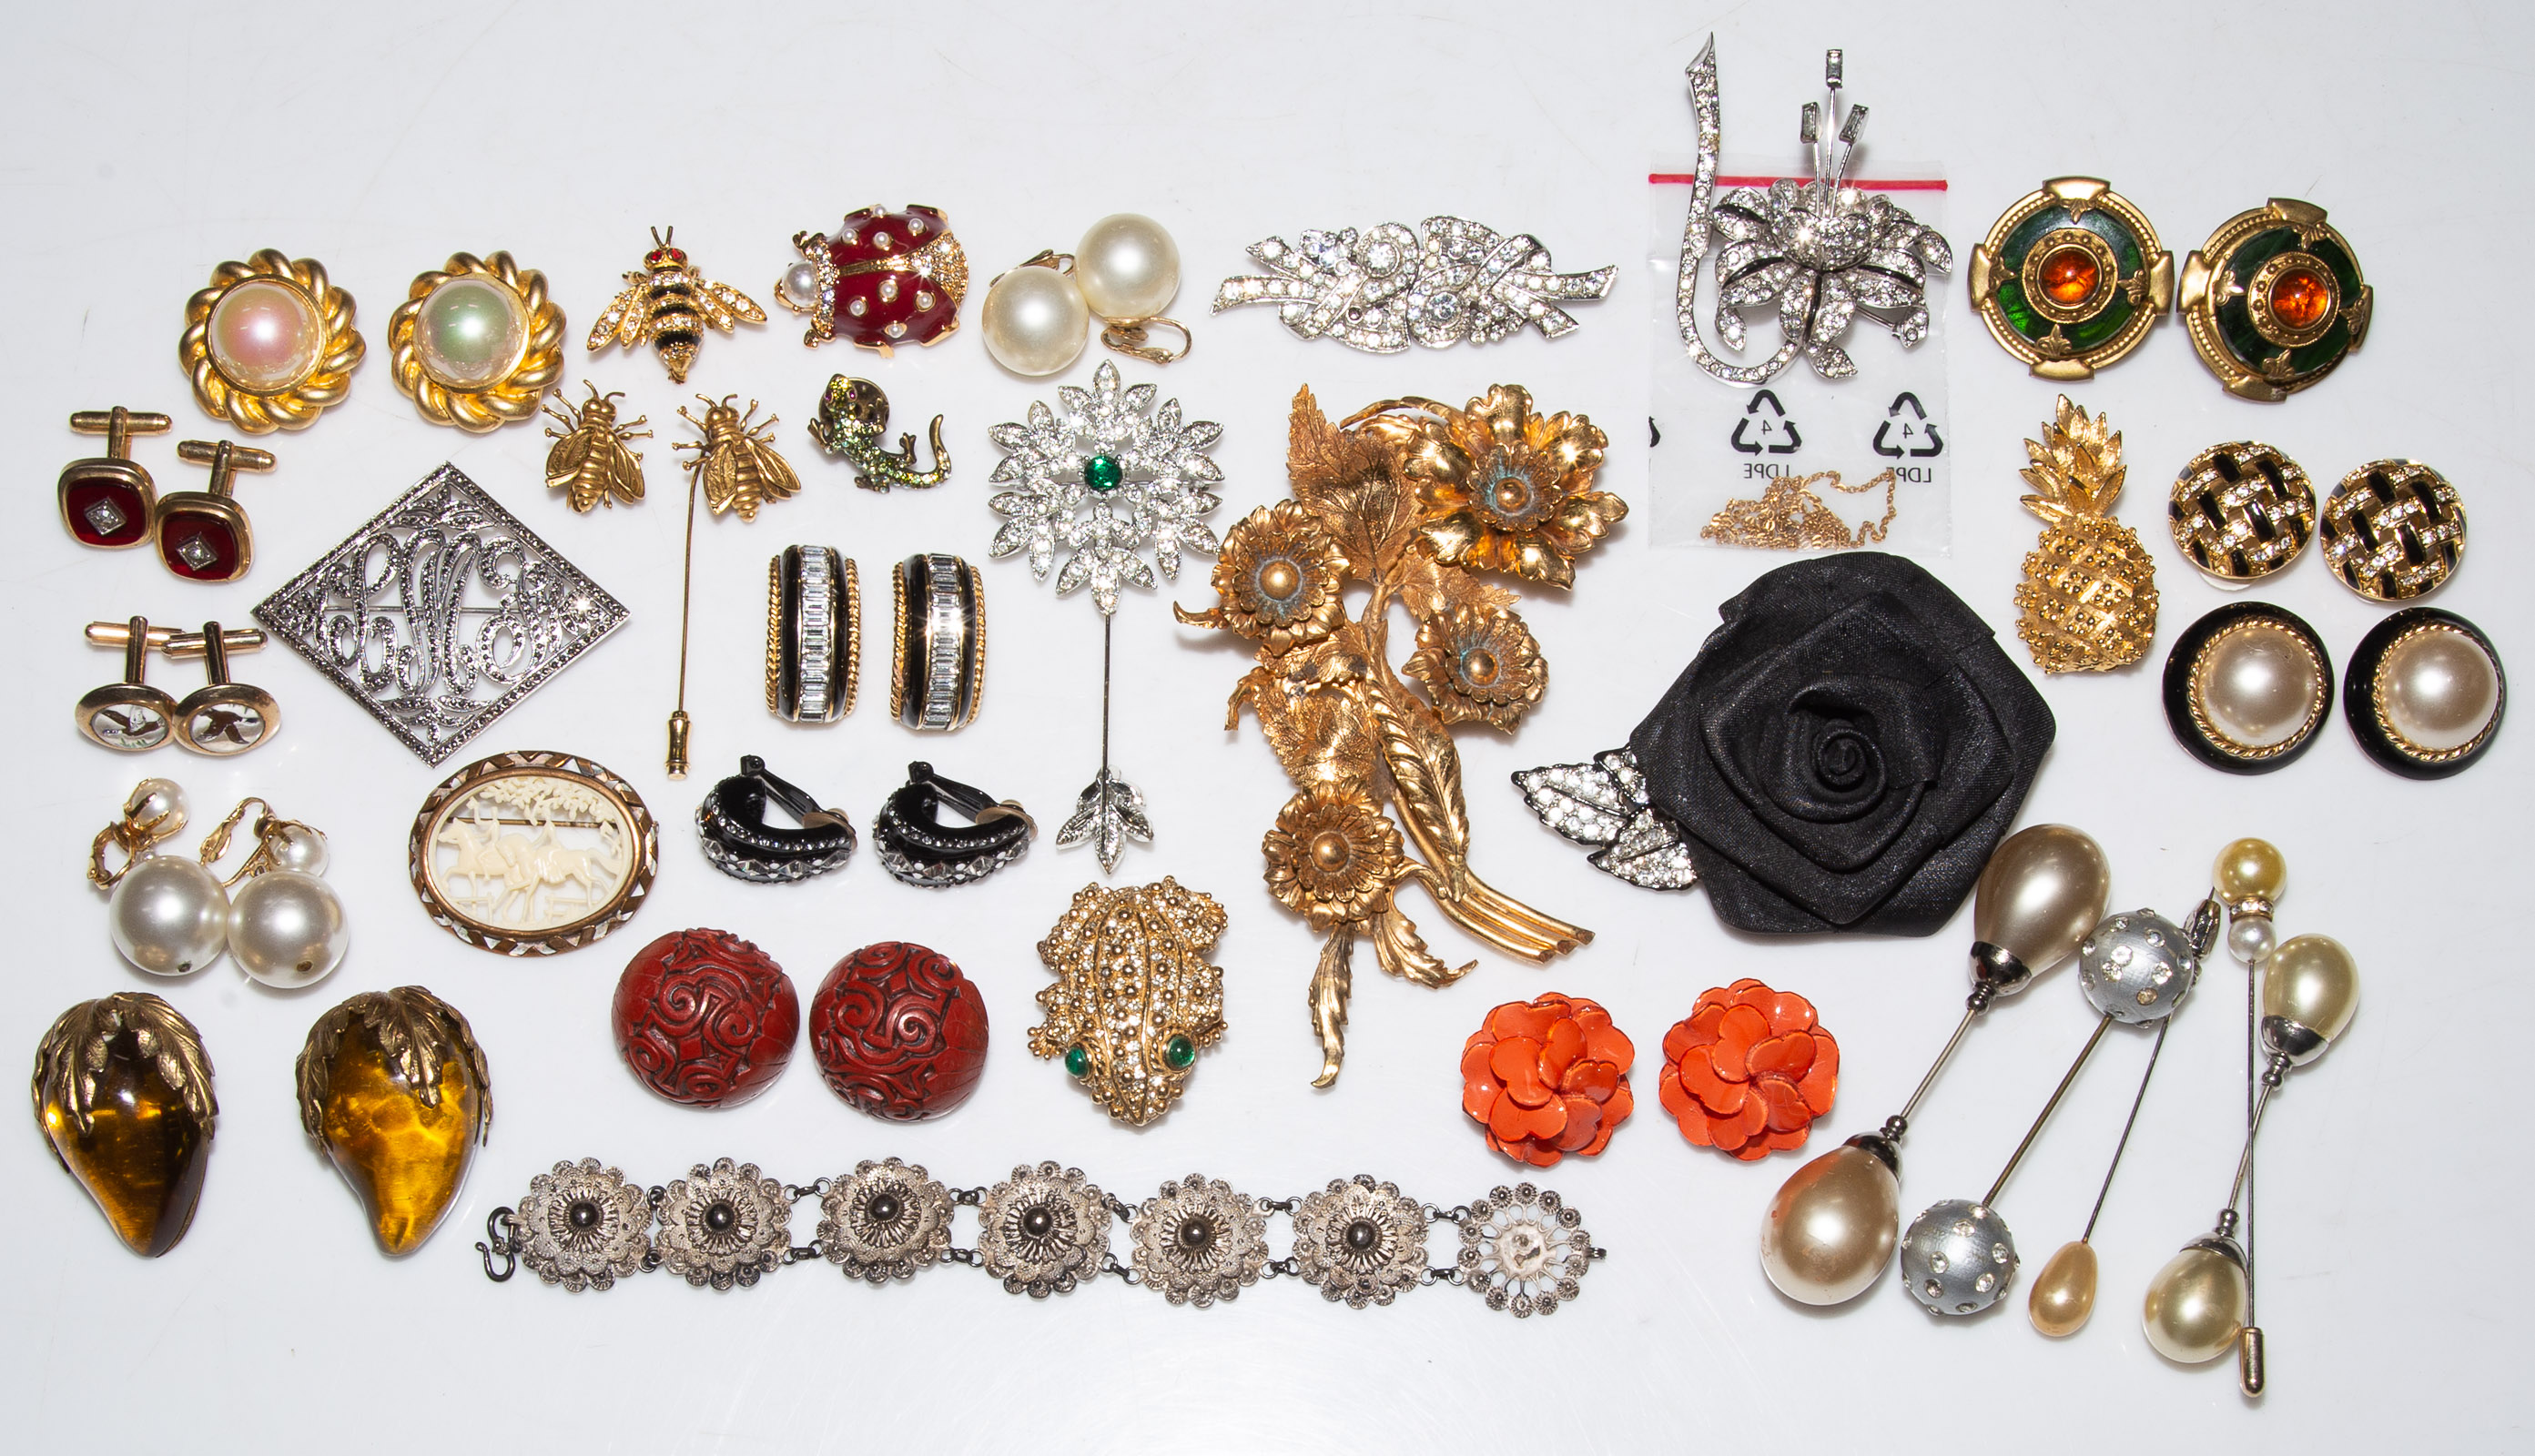 A COLLECTION OF VINTAGE JEWELRY 3105e3